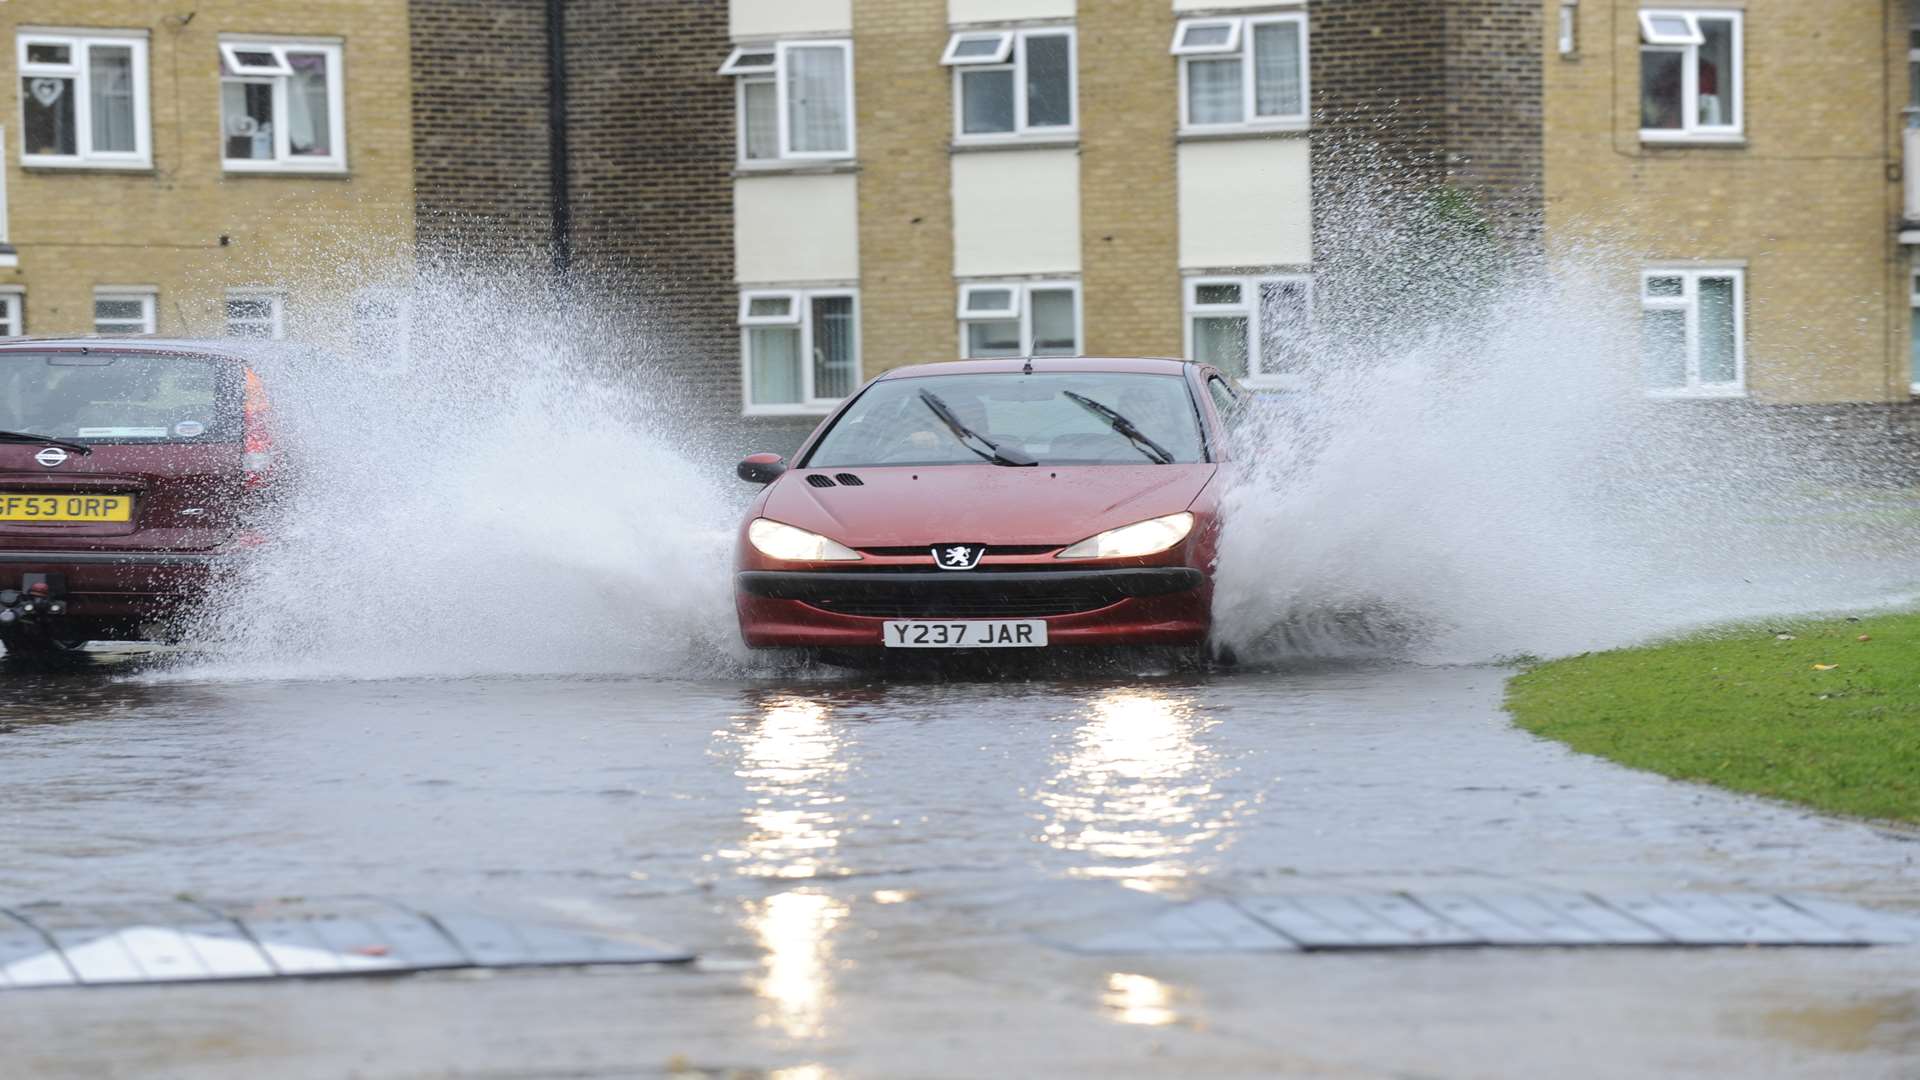 Roads are being flooded after torrential rain